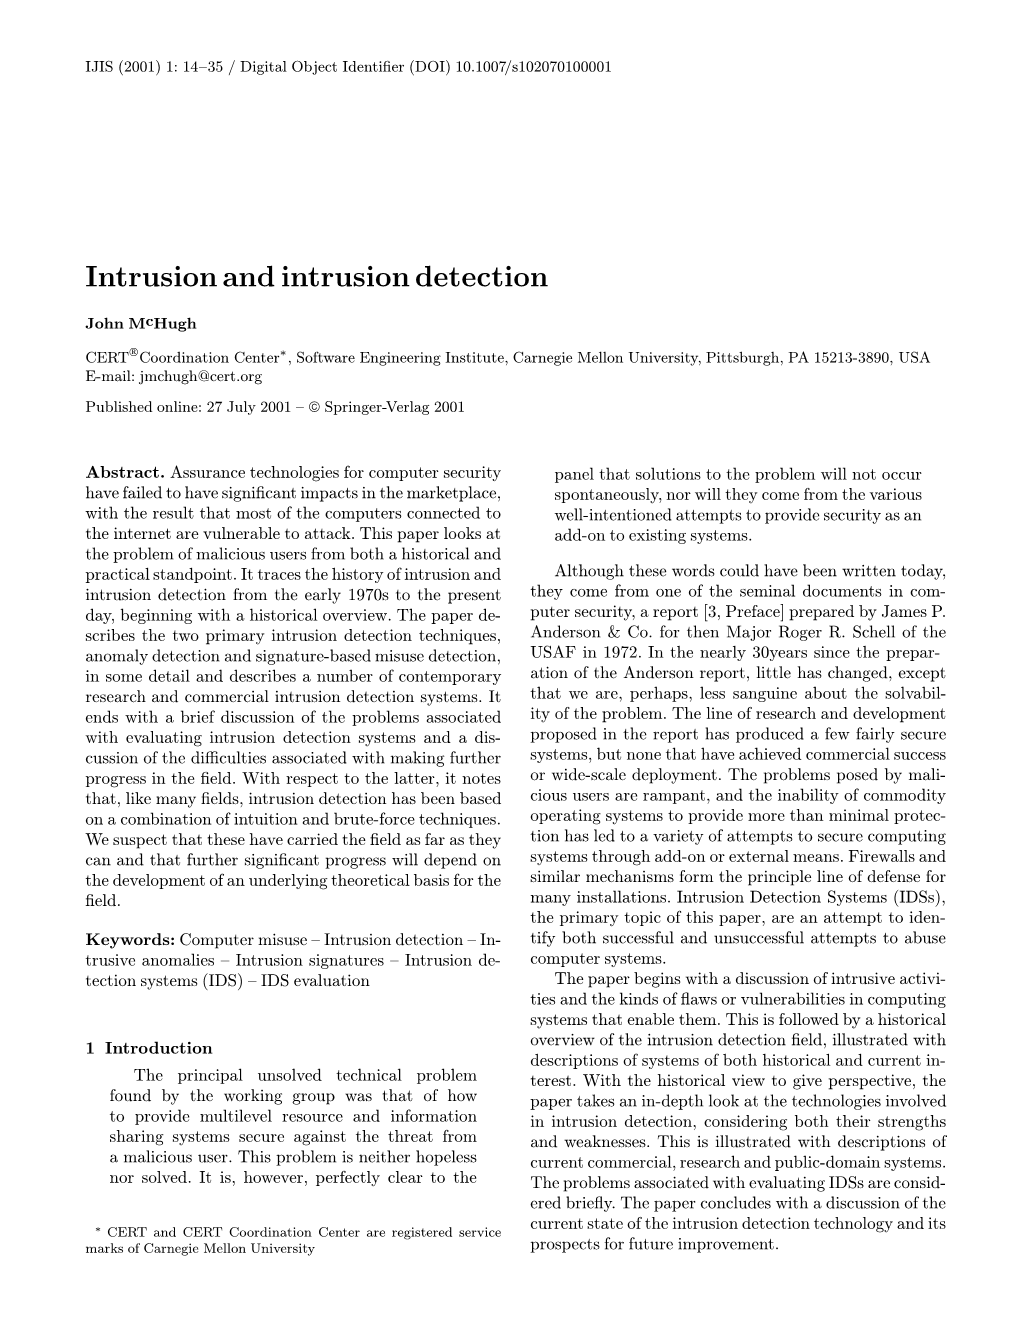 Intrusion and Intrusion Detection